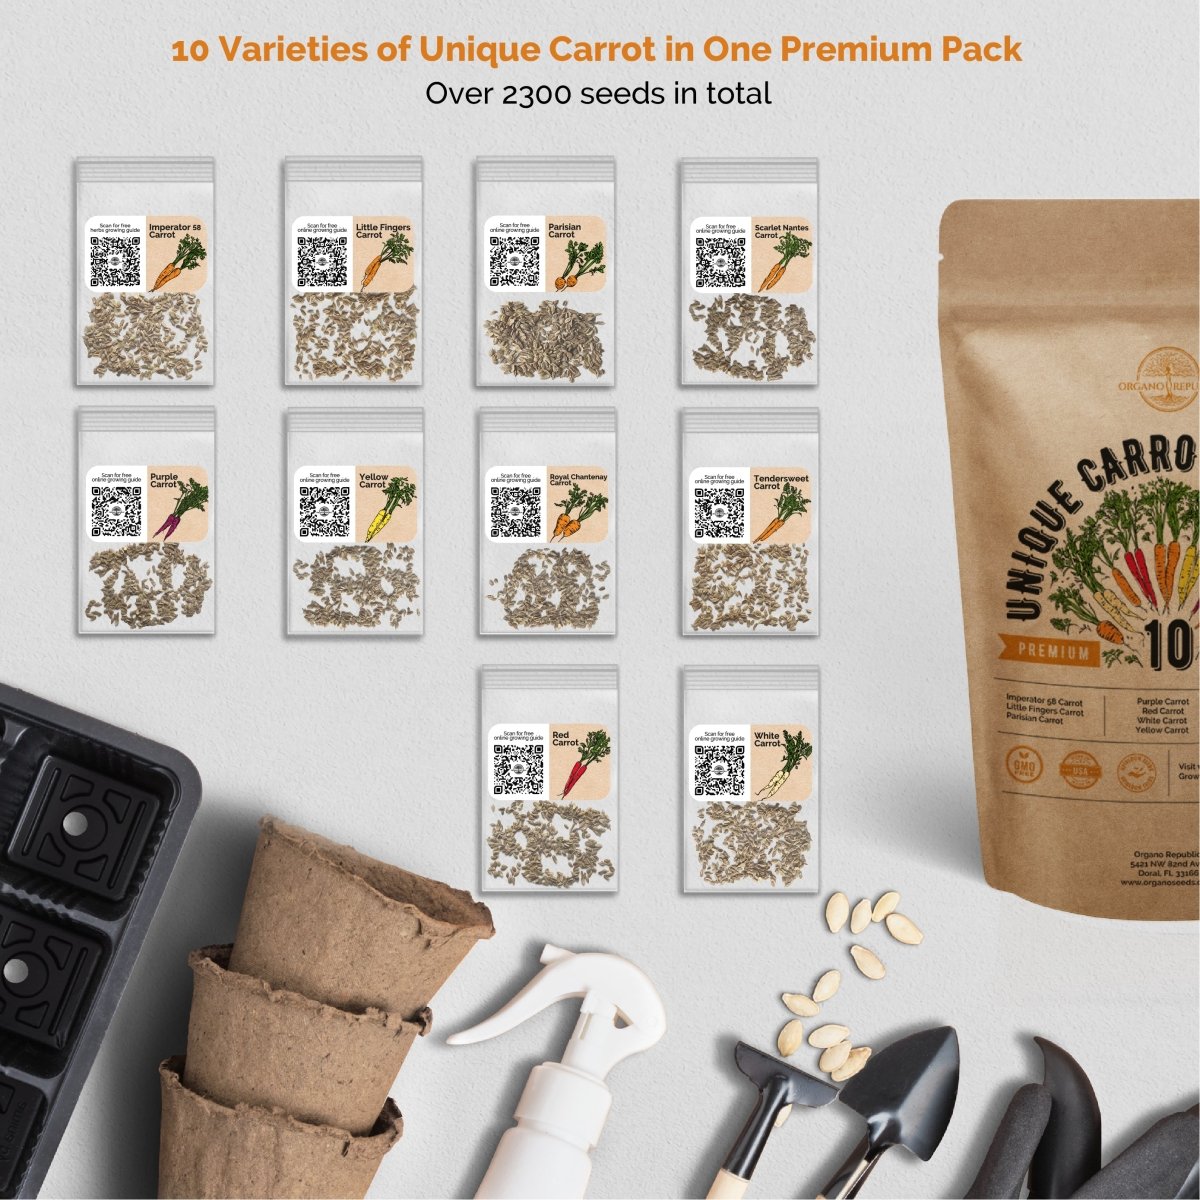 25 Winter Vegetable & 10 Carrot Seeds Variety Packs Bundle Non-GMO Heirloom Seeds for Planting Indoor and Outdoor Over 10100 Carrot & Vegetables Seeds in One Value Bundle - Organo Republic